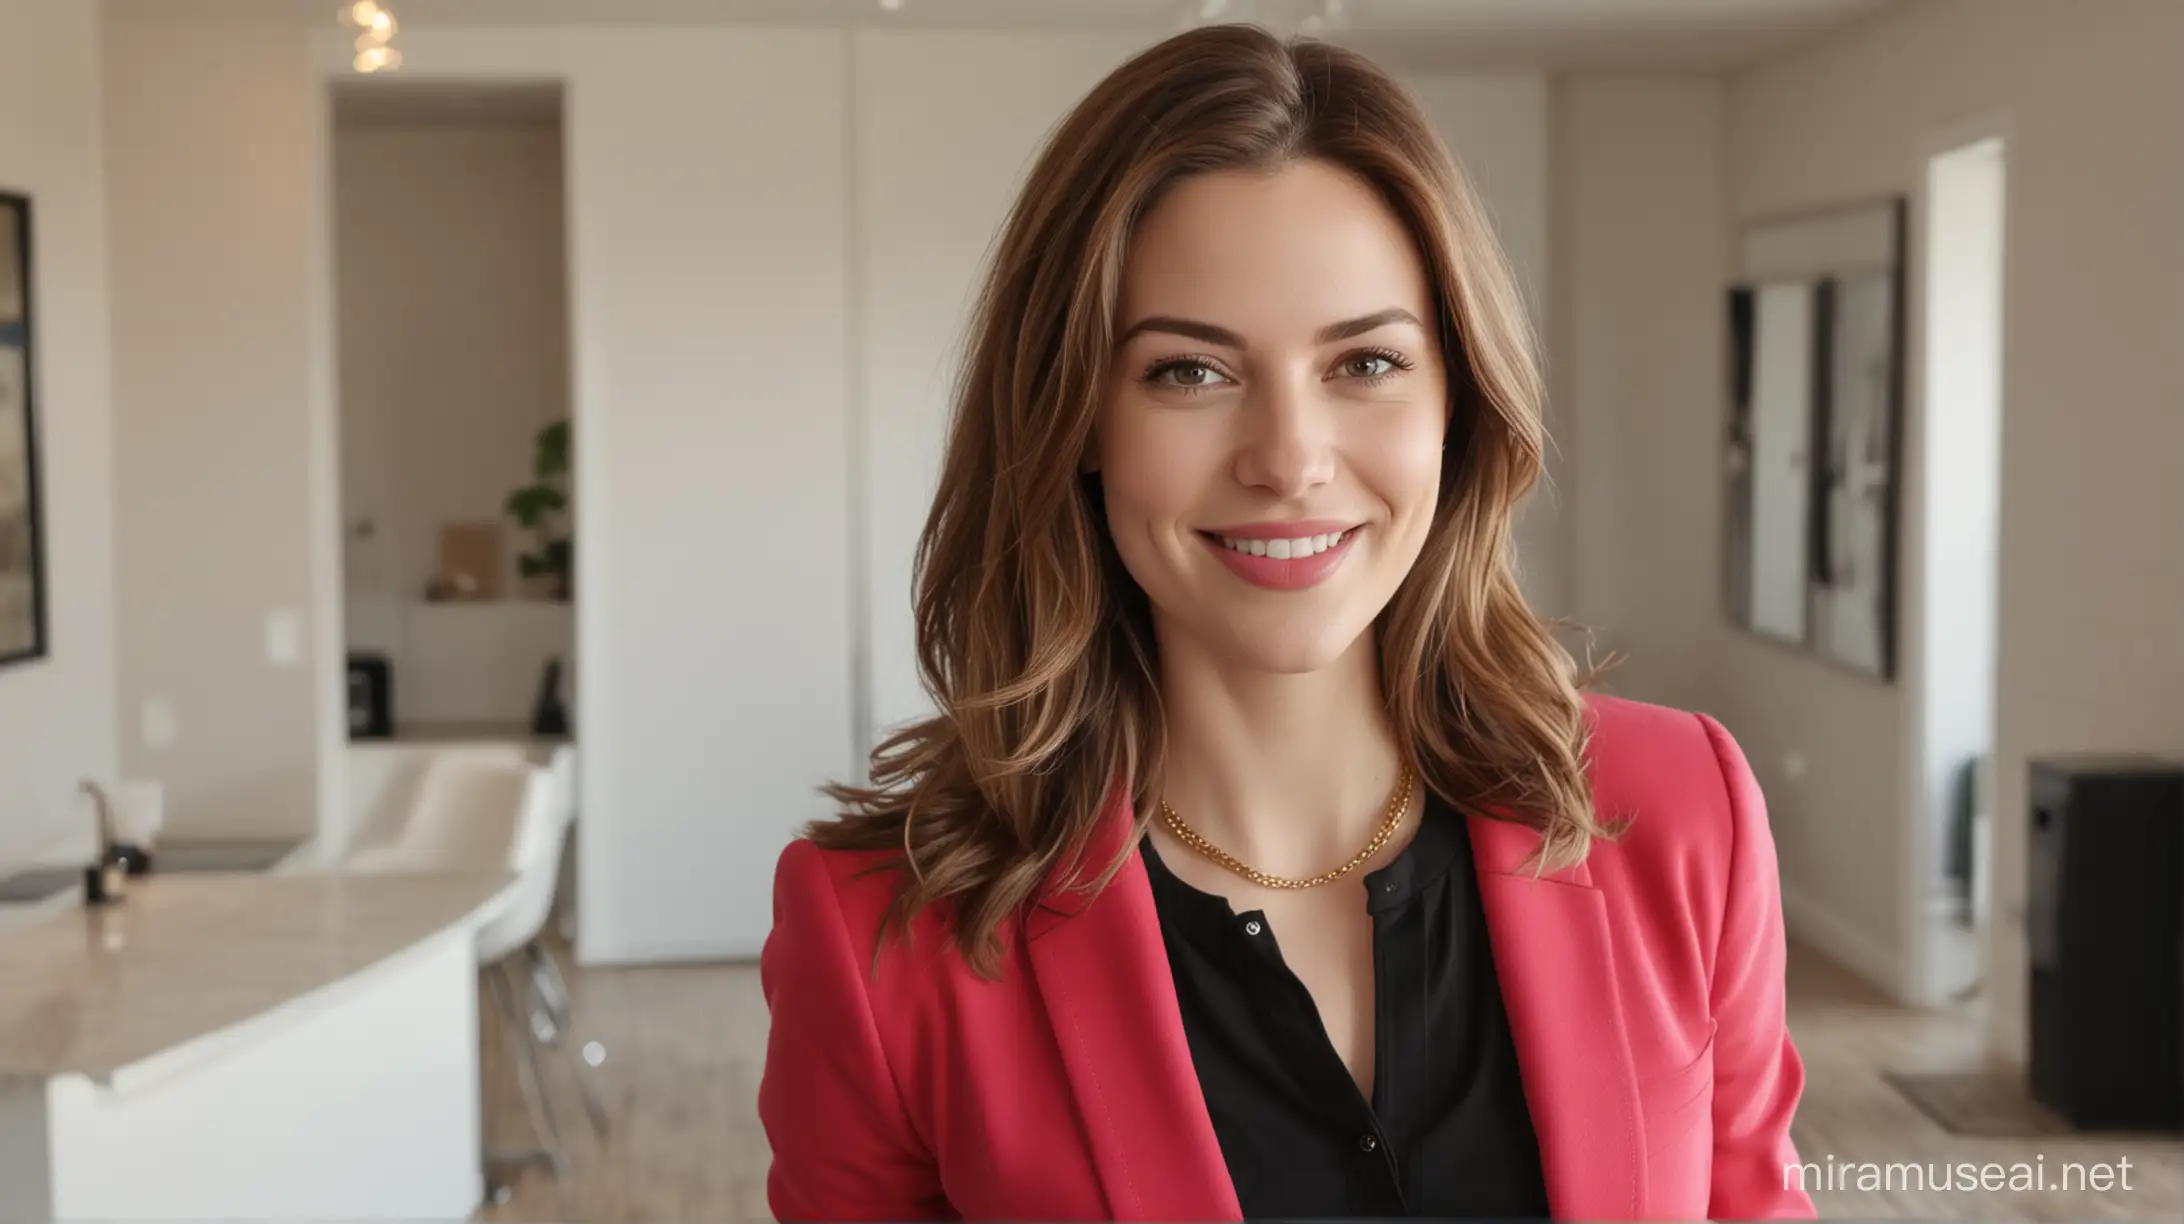 30 year old smiling white female with long brown hair parted to the right staring straight at the camera in a modern apartment background. She has pale skin and pink lipstick. She is wearing a red blazer, very low cut black shirt and black pants. She is also wearing a simple gold necklace.